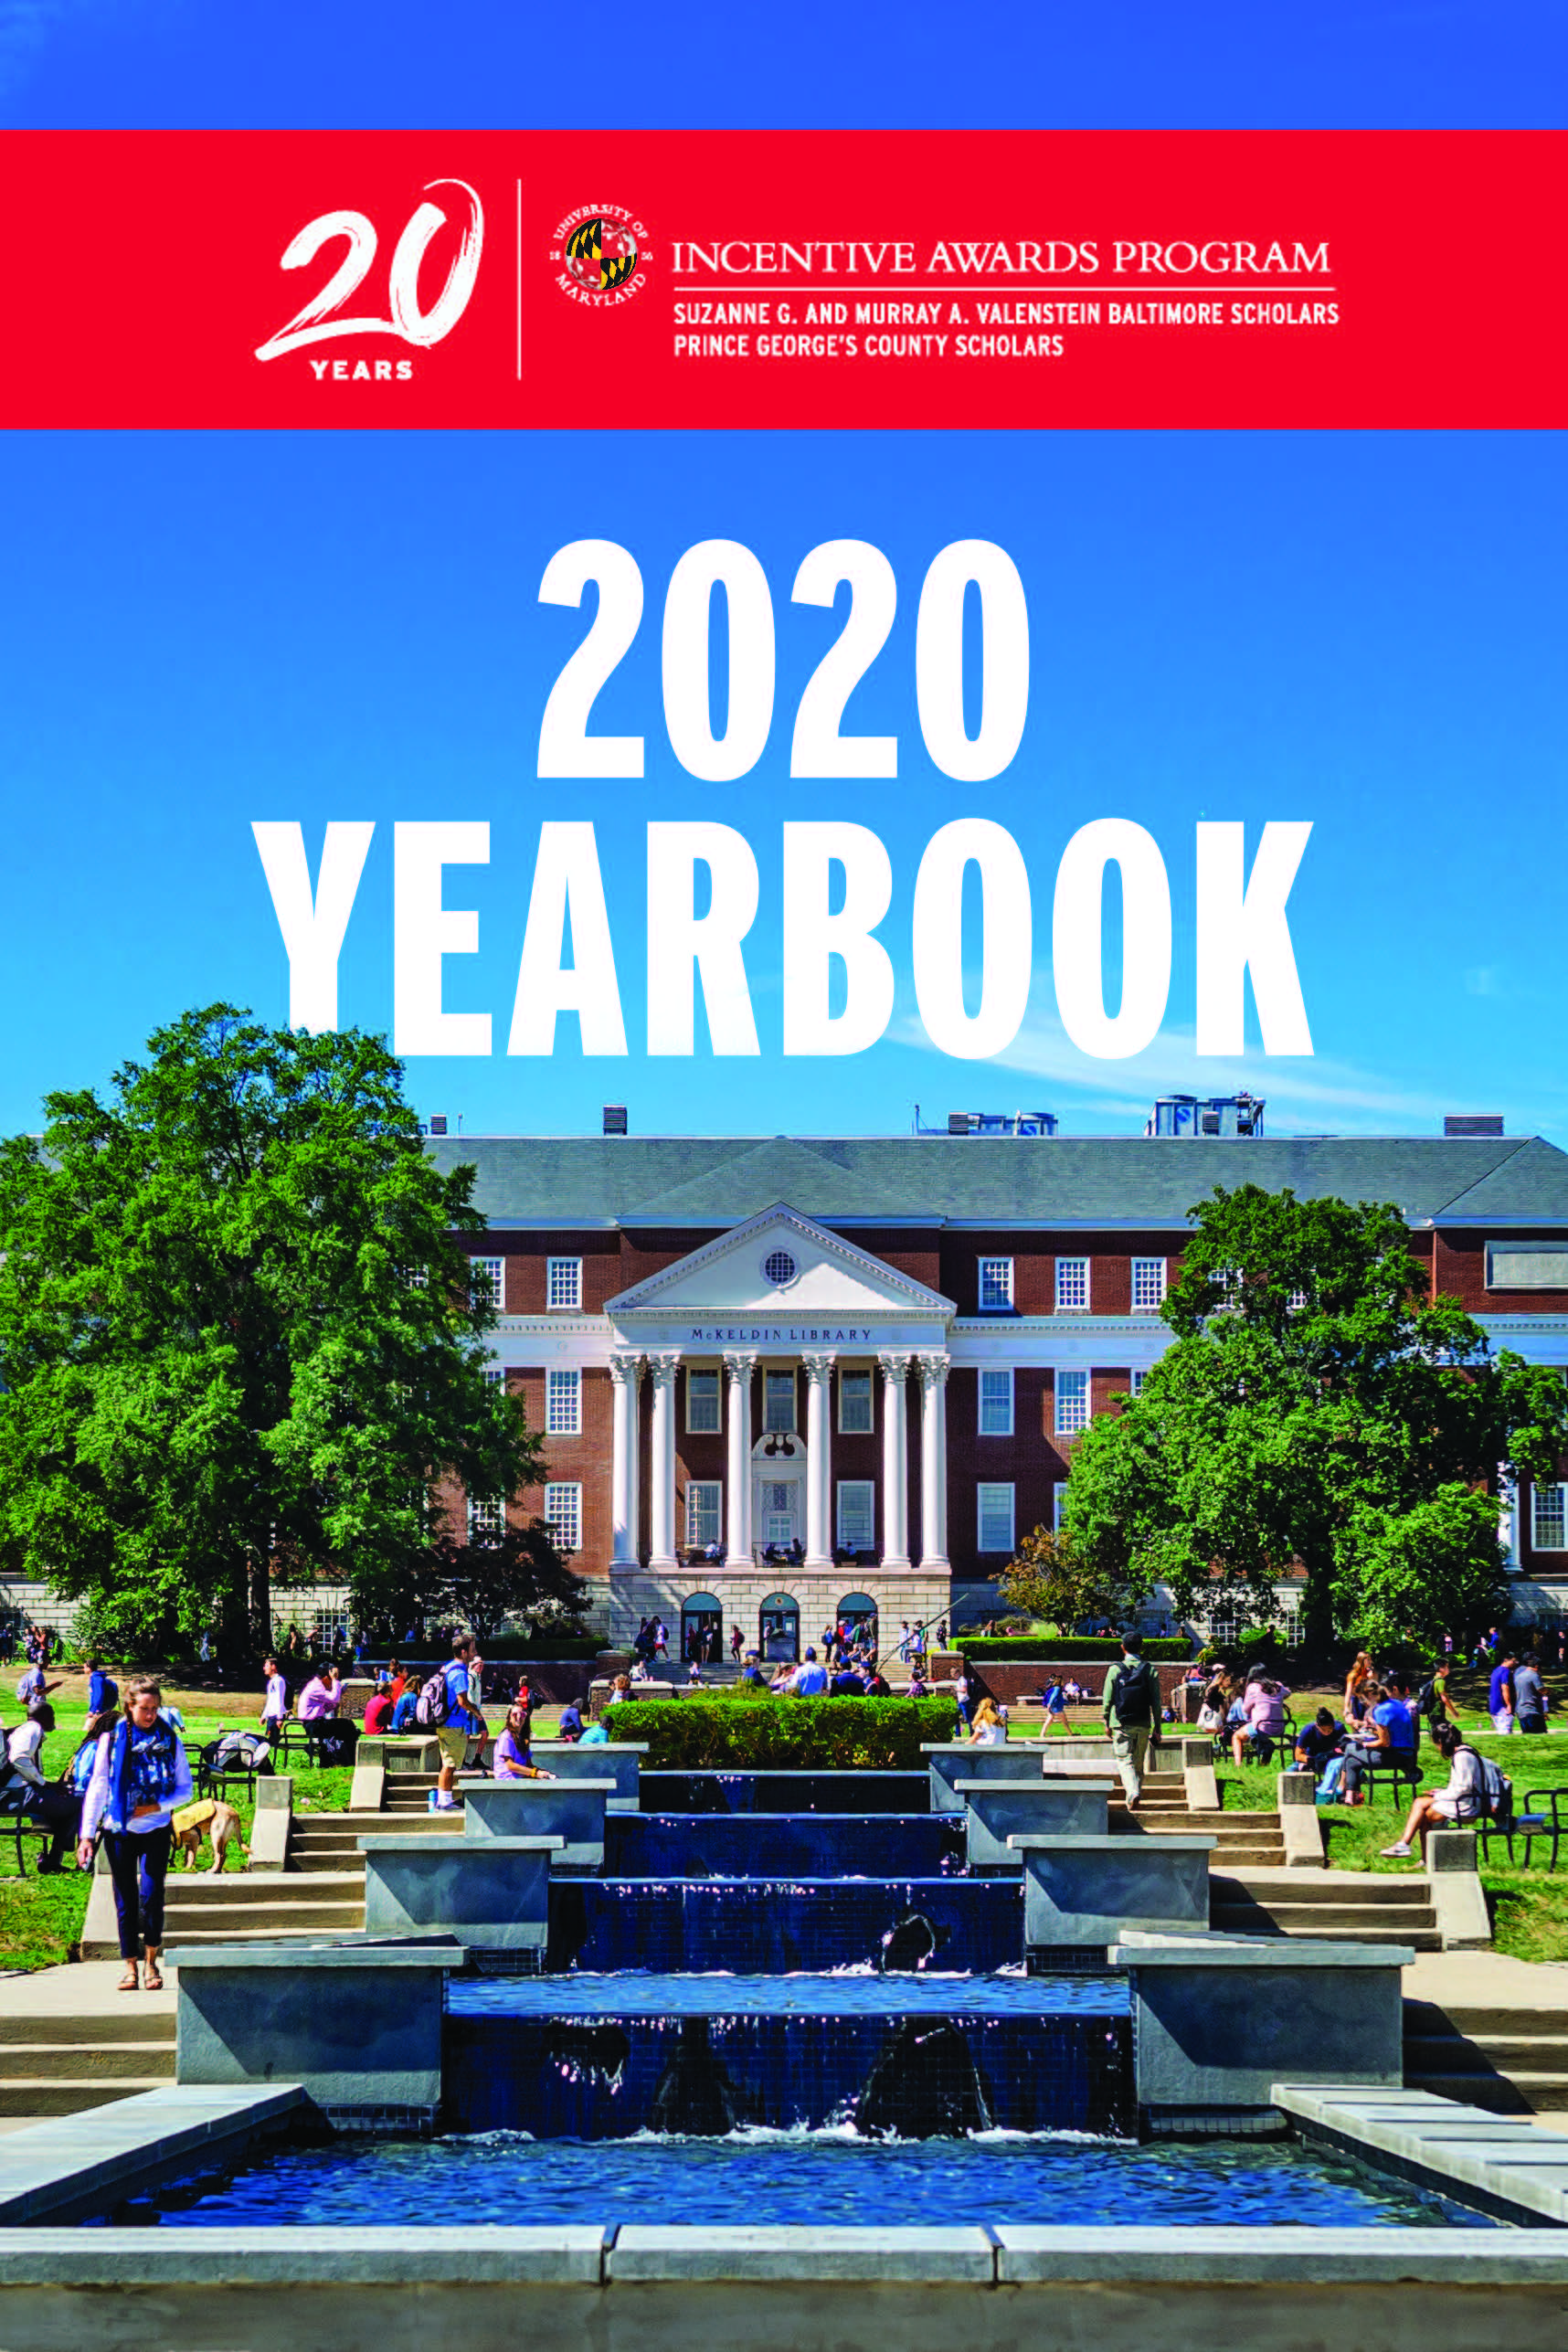 The cover of the 2020 yearbook